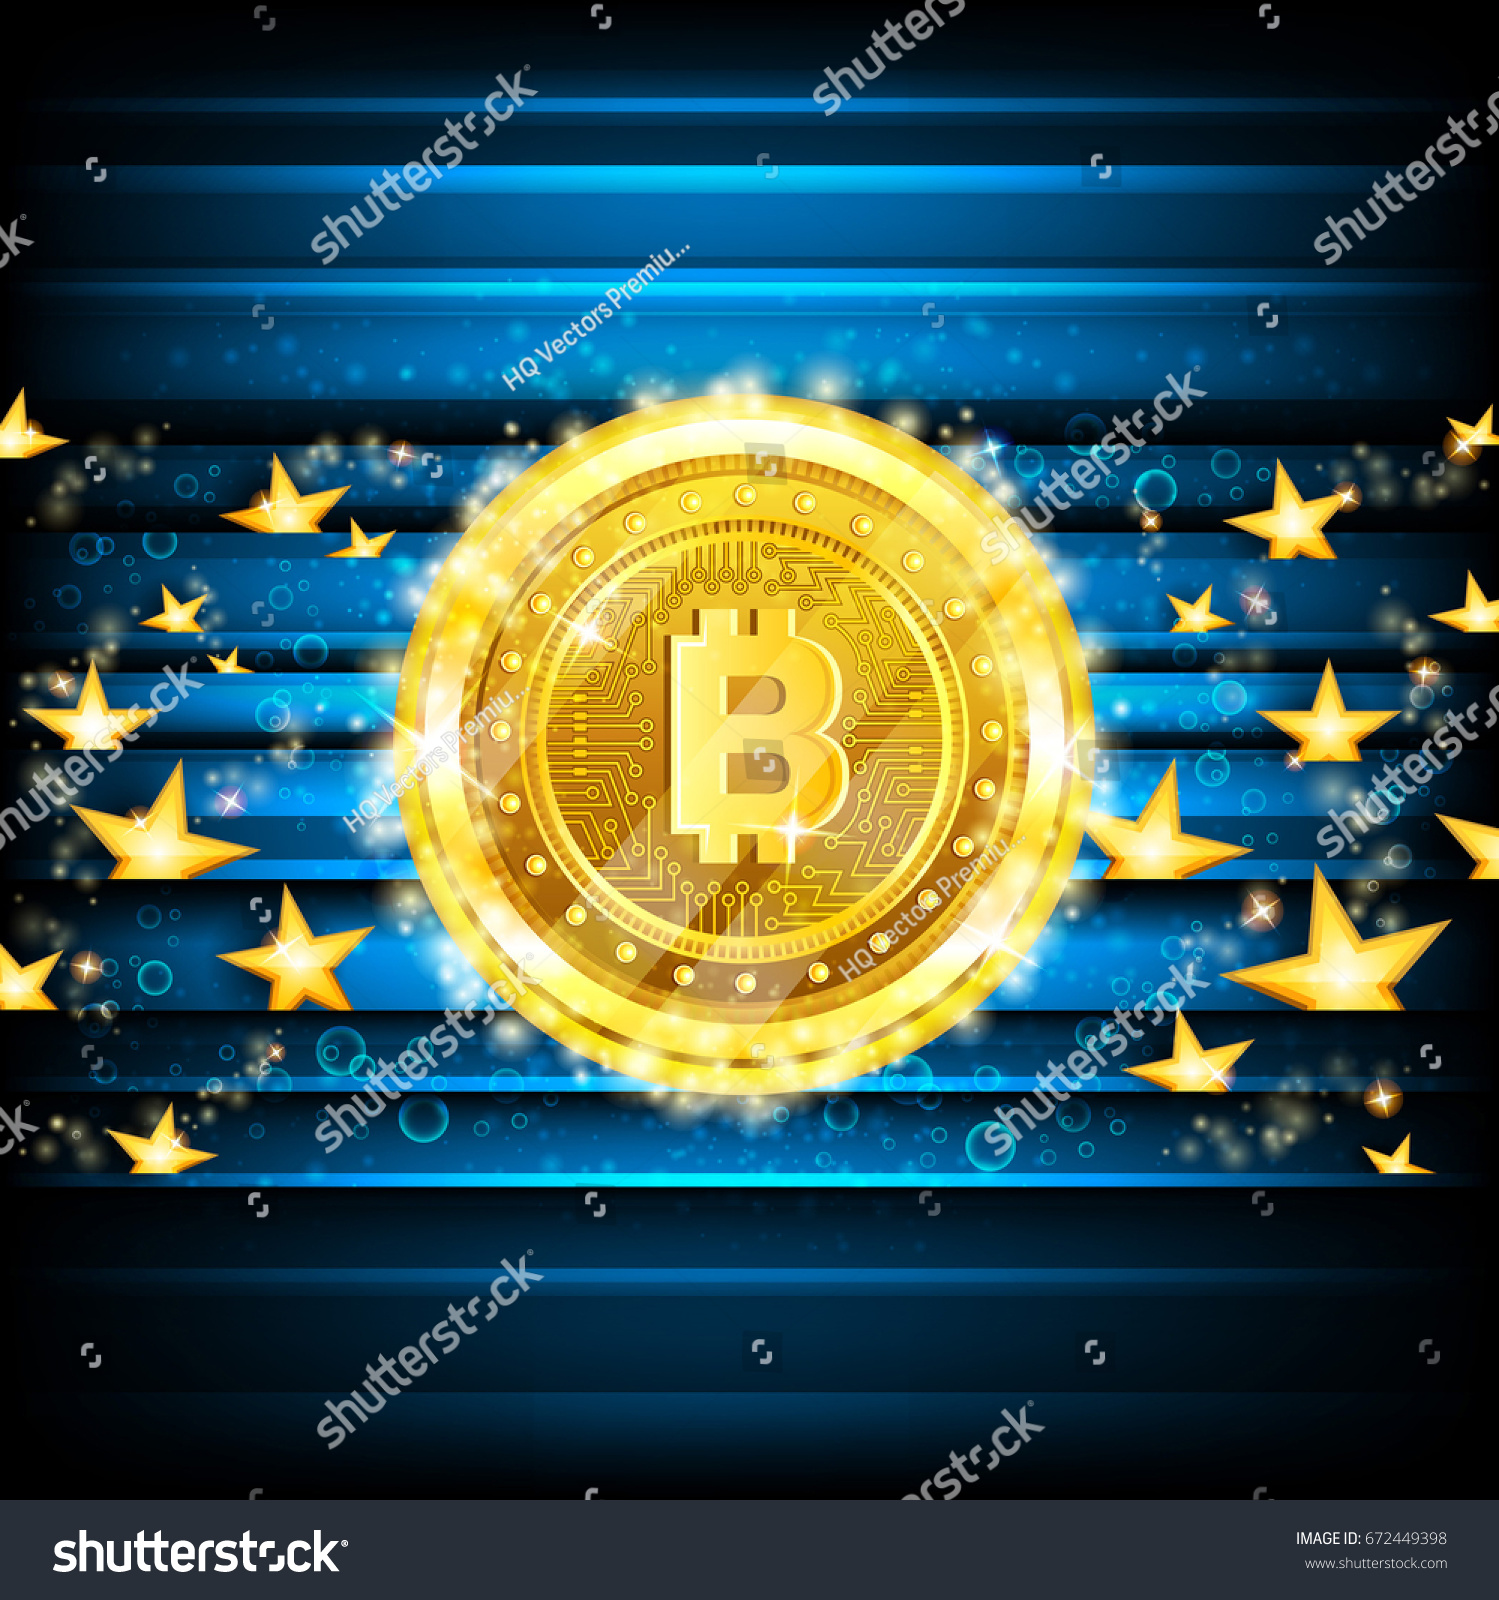 SVG of Golden bit coins and stars on blue glossy background svg